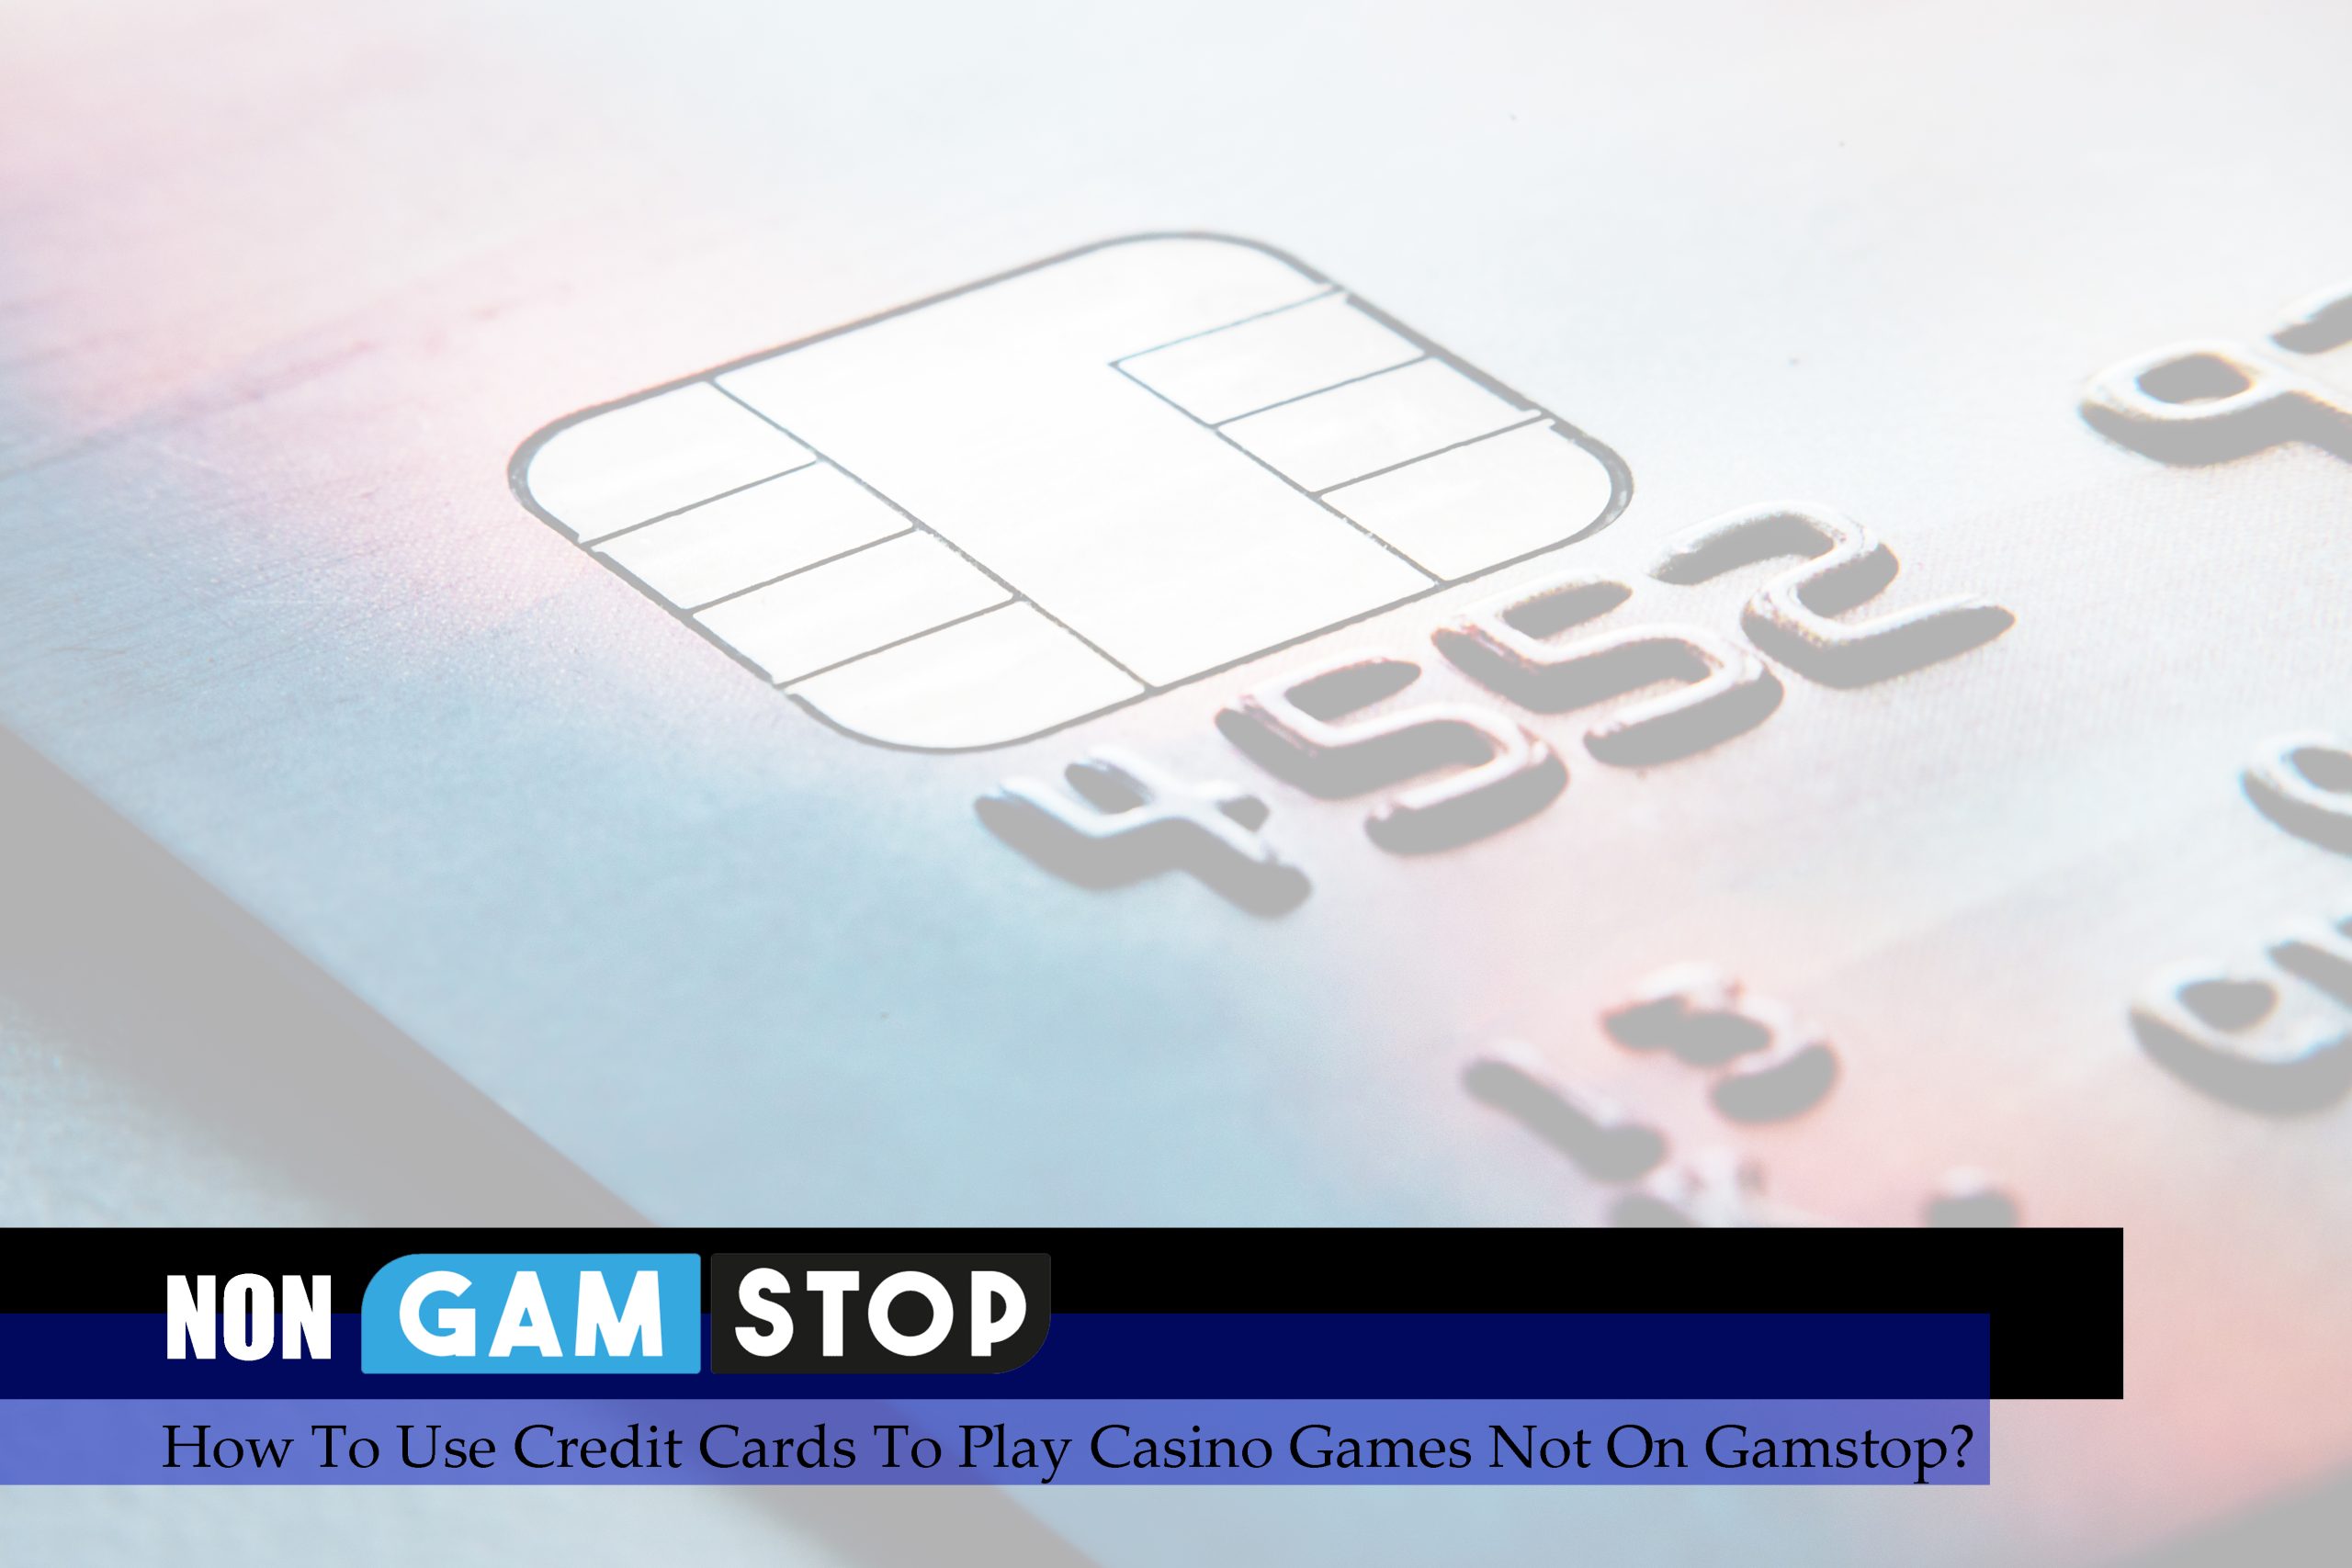 How To Use Credit Cards To Play Casino Games Not On Gamstop?